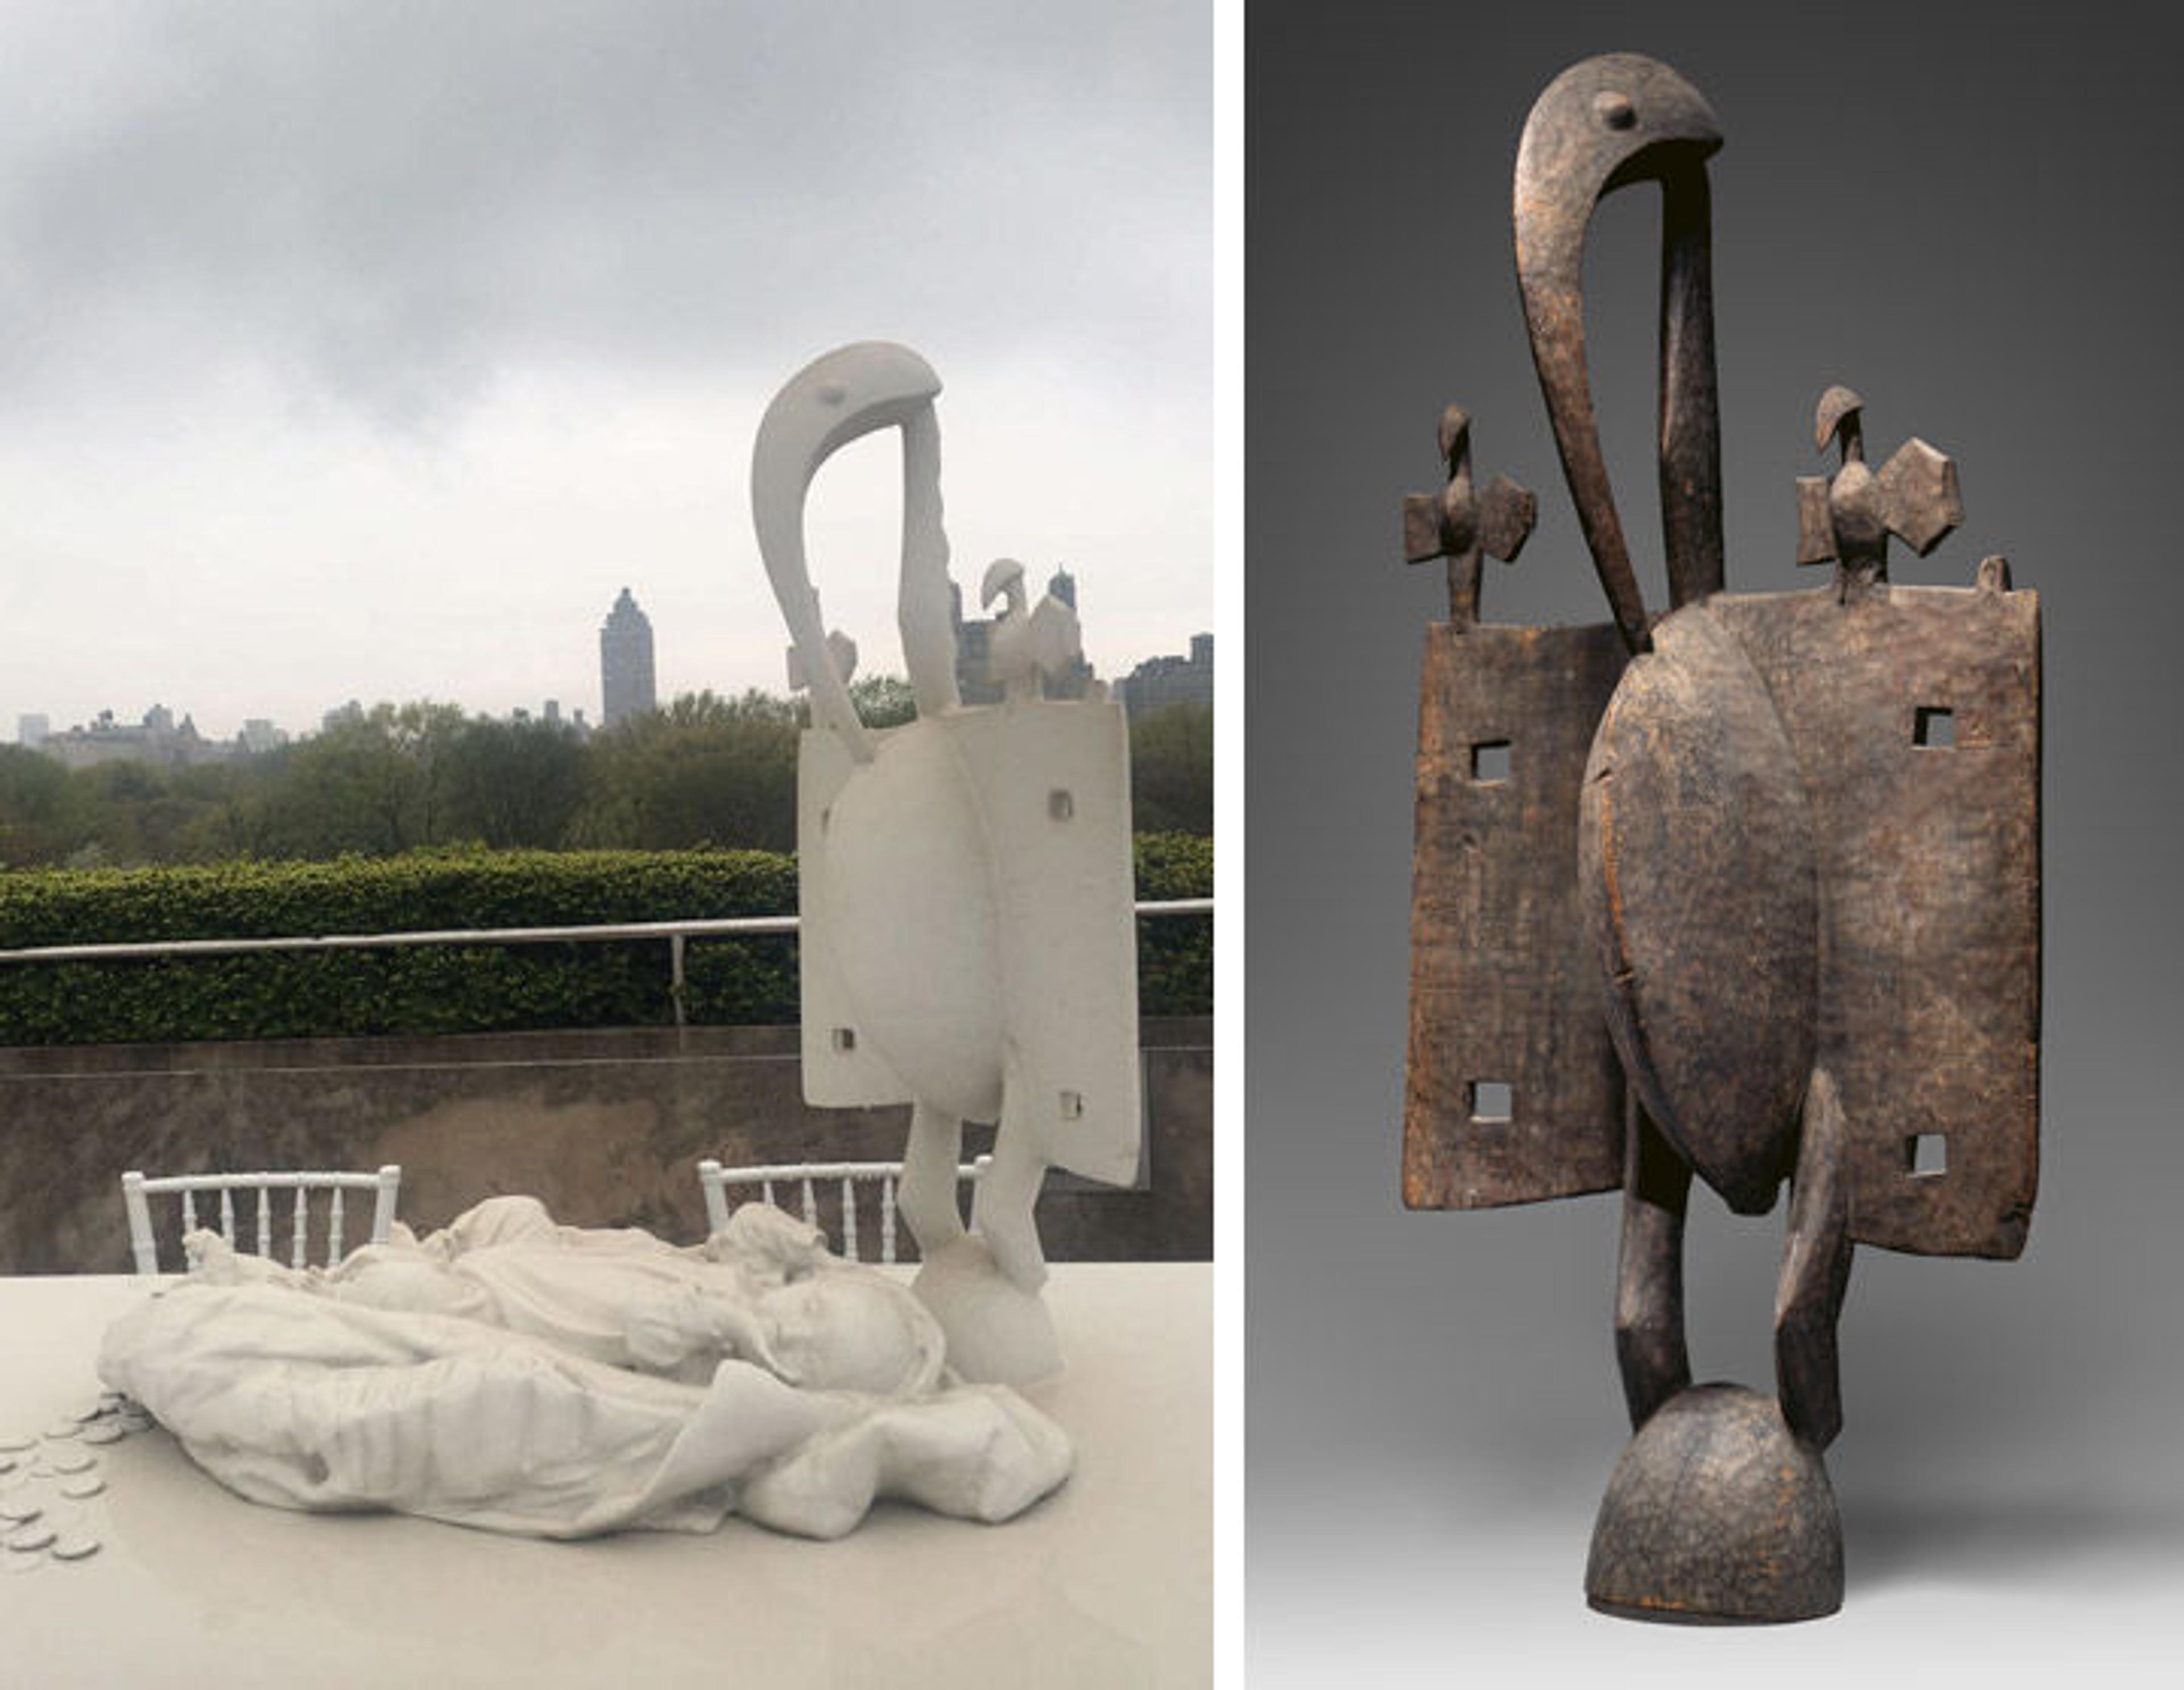 Left: View of Adrian Villar Rojas's Theater of Disappearance on The Met's Cantor Roof Garden. Right: A bird sculpture my by the Senufo peoples of the Ivory Coast